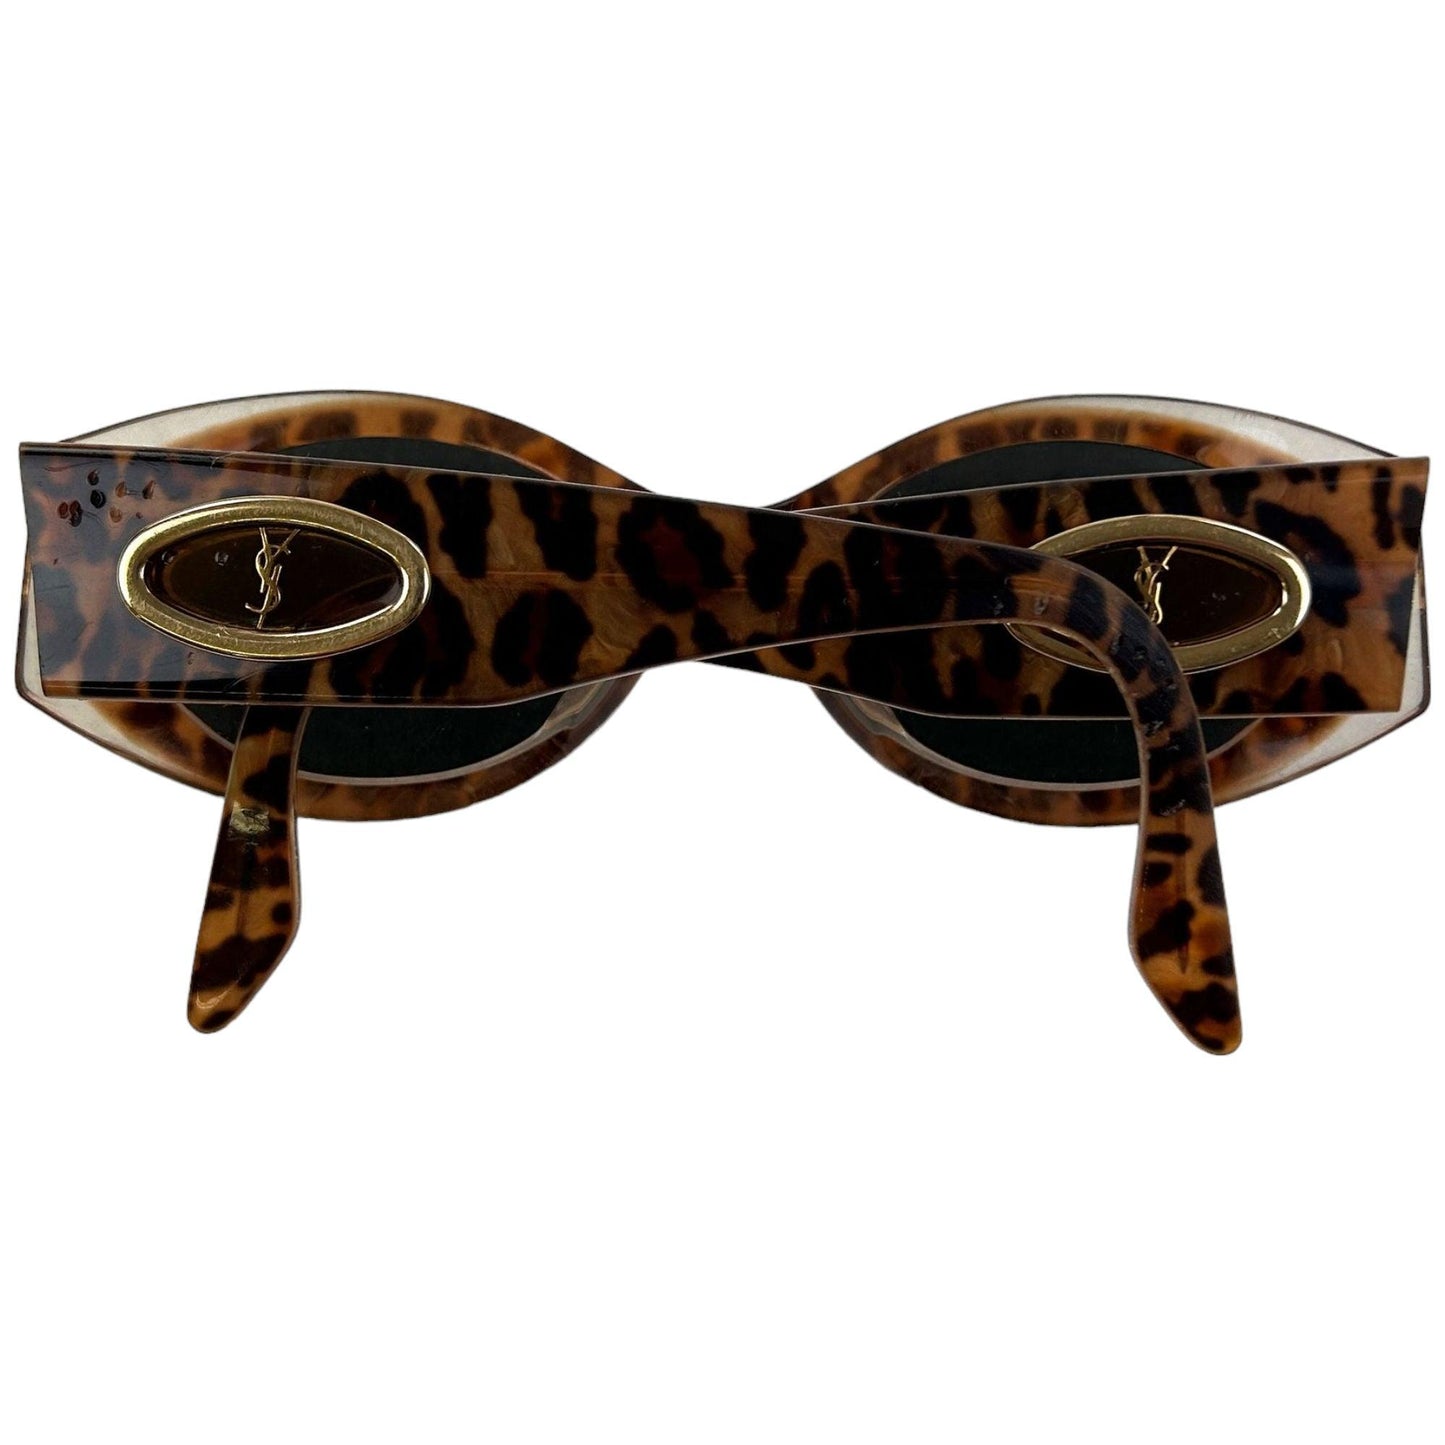 Vintage Yves Saint Laurent Tortoise Shell Sunglasses Size One Size - Known Source